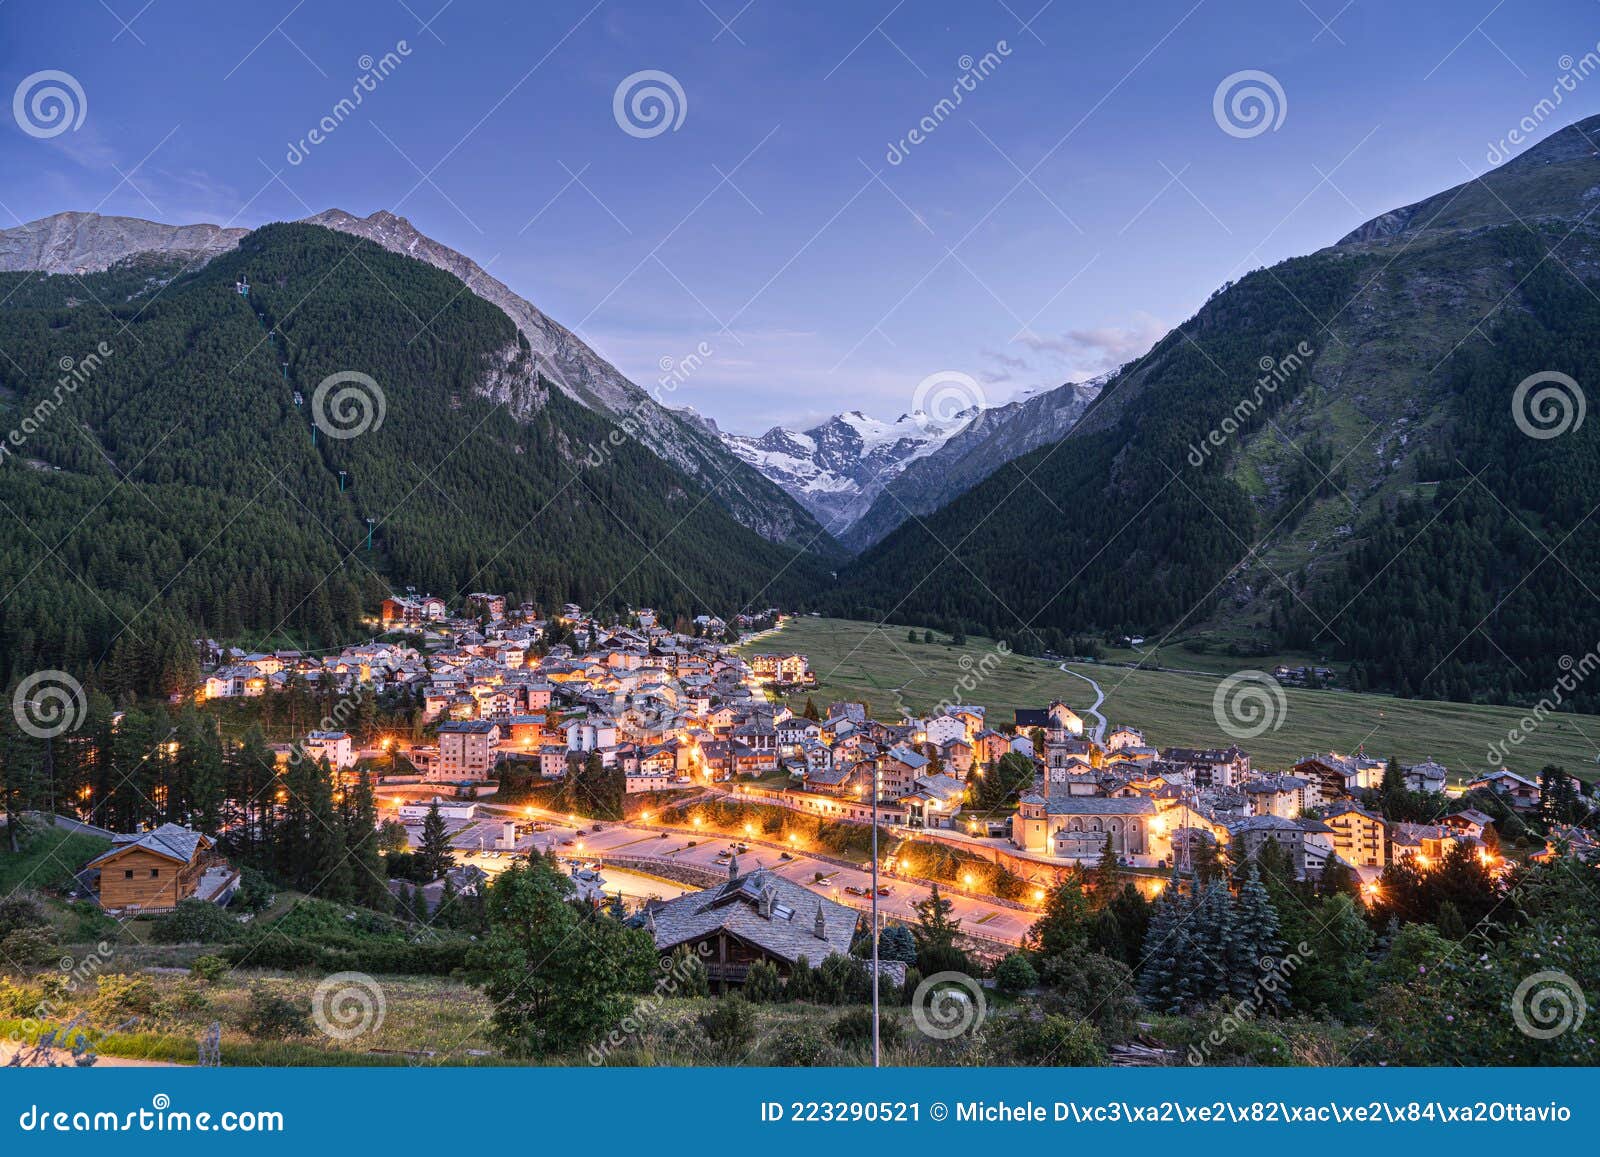 tourist information cogne italy